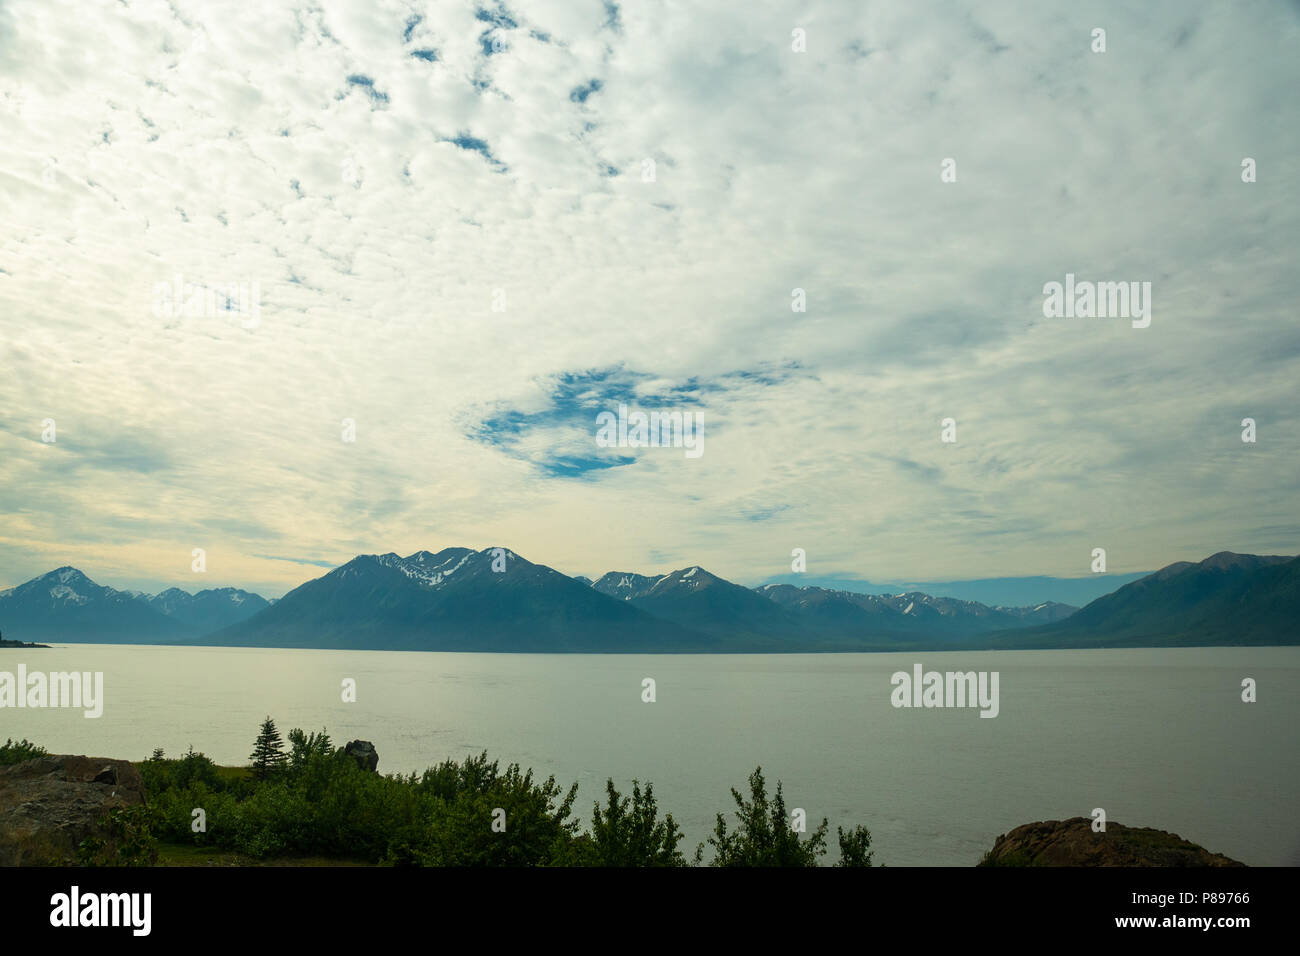 A view of Cook Inlet near Anchorage, Alaska. Stock Photo